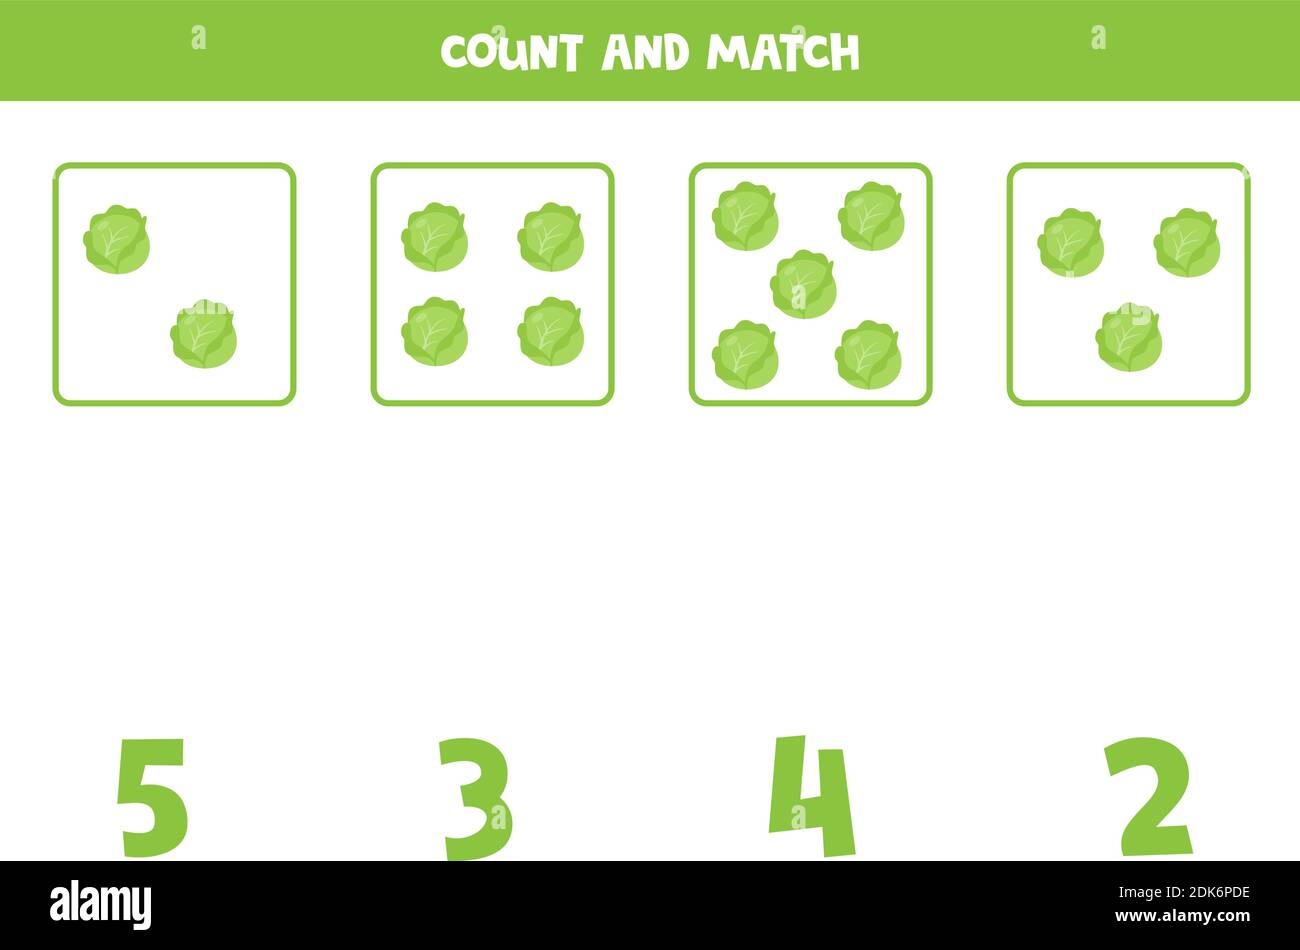 Count all cabbages and match with correct answer. Educational math game for kids. Stock Vector